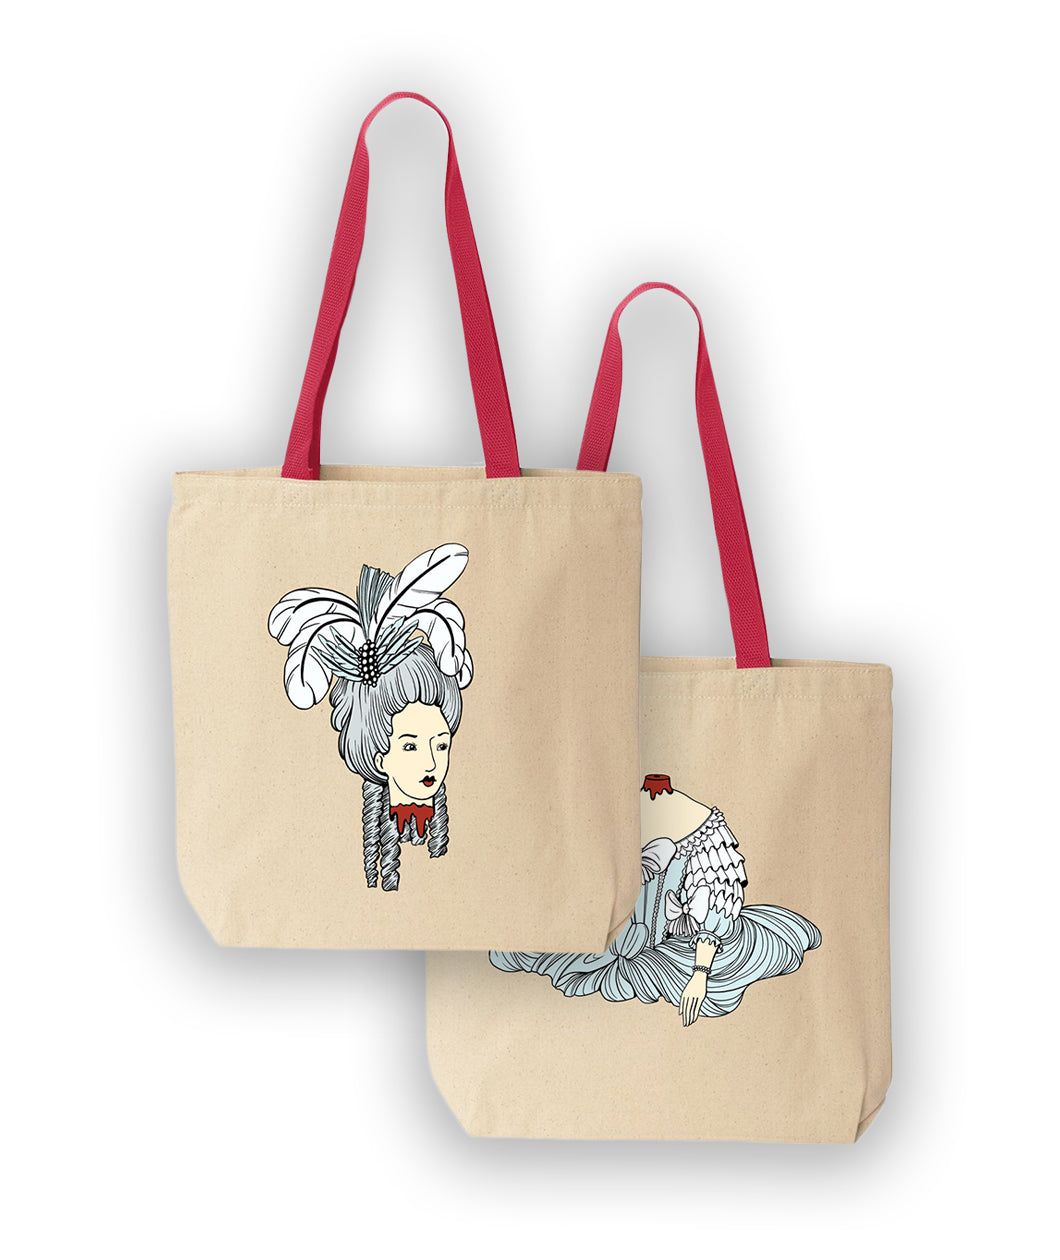 A canvas Noble Blood tote bag with a red handle. On the front of the bag is a bodice in a white and blue, ruffly corset with a cut off head with blood. On the back of the bag is Marie Antoinette's head adorned with feathers with a bloody neck.